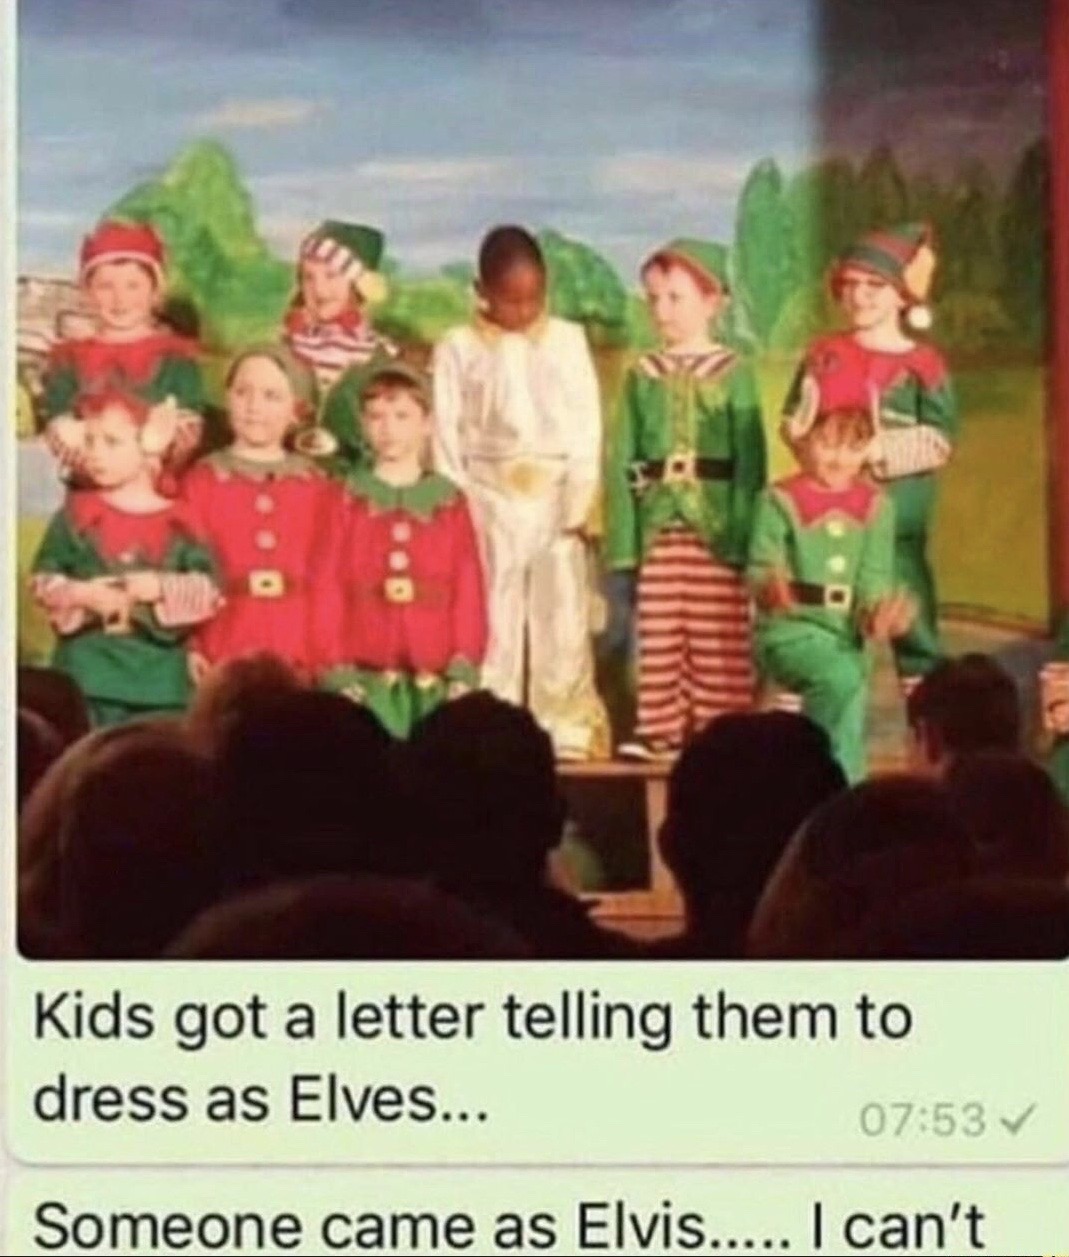 kids got a letter telling them to dress as elves - Kids got a letter telling them to dress as Elves... Someone came as Elvis..... I can't